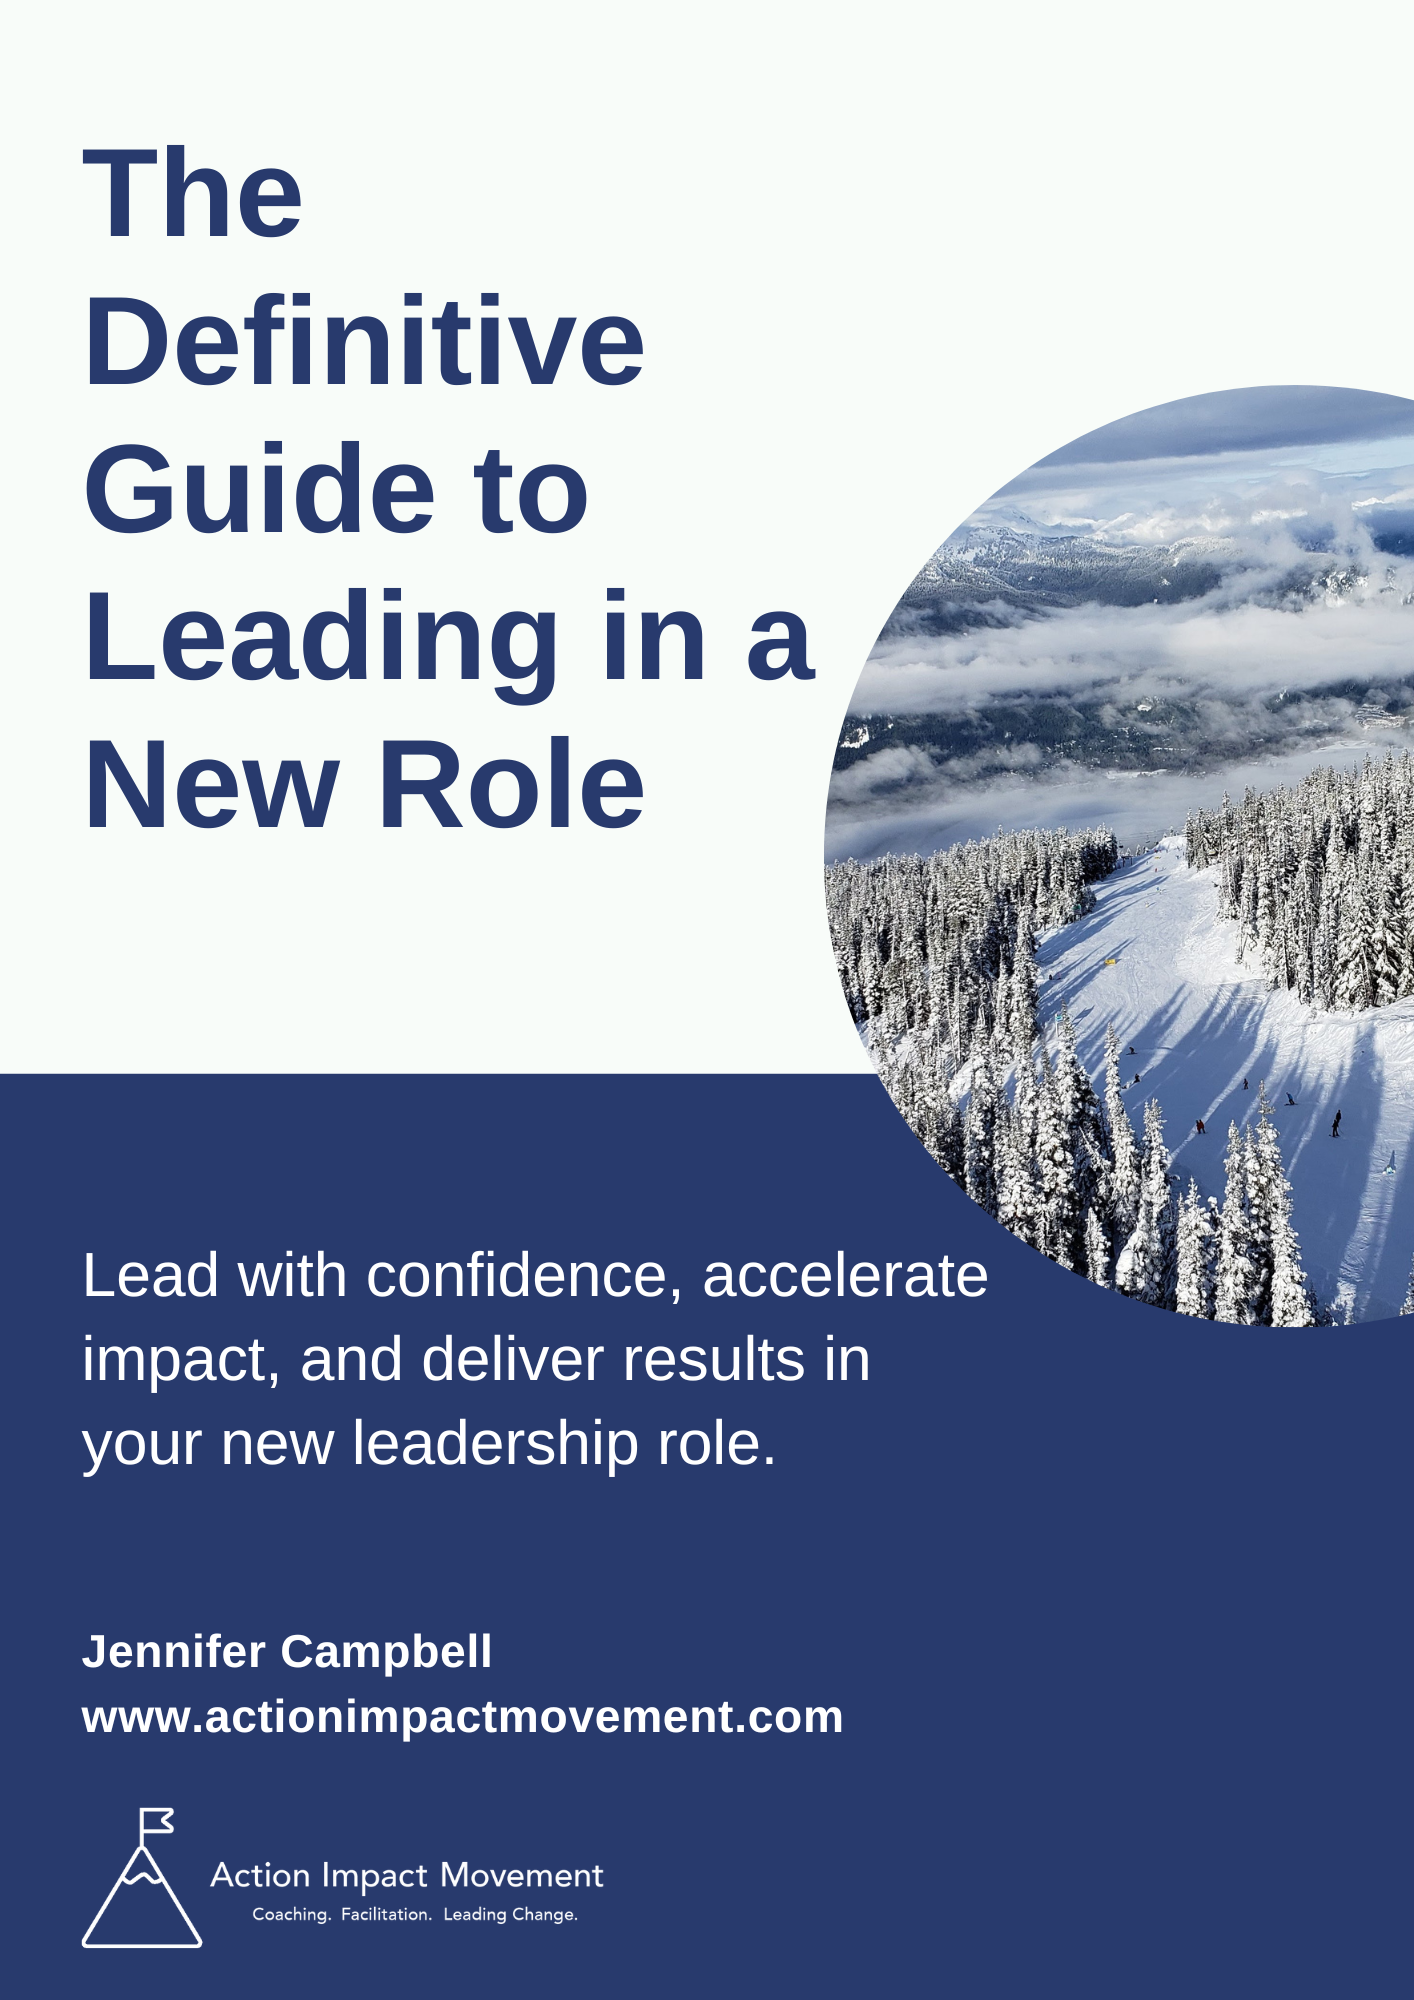 The Definitive Guide to Leading in a New Role